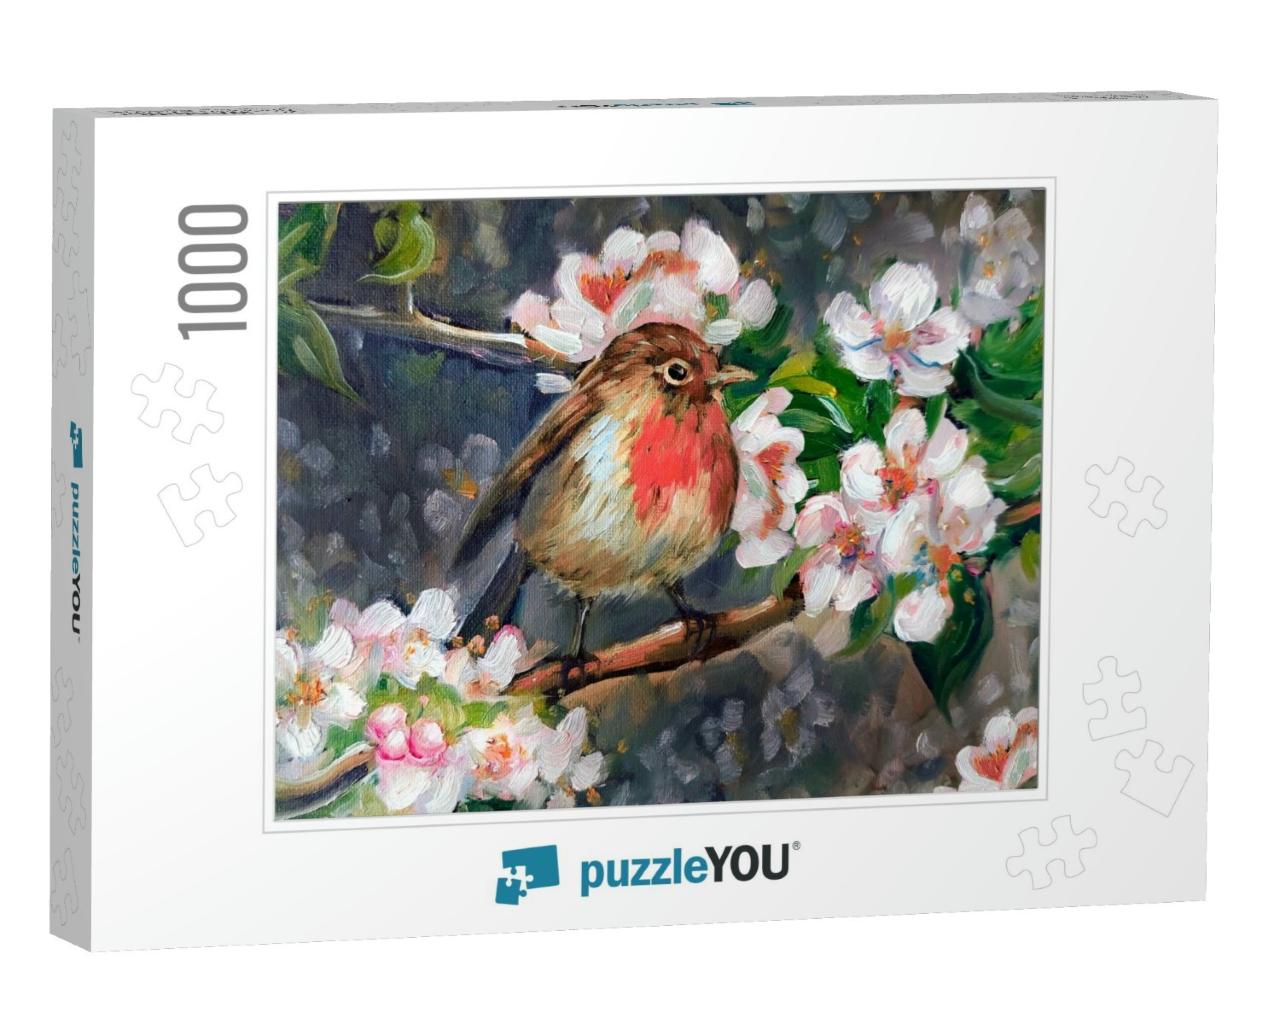 Cute Spring British Red Robin Bird. Hand Drawn Oil Painti... Jigsaw Puzzle with 1000 pieces